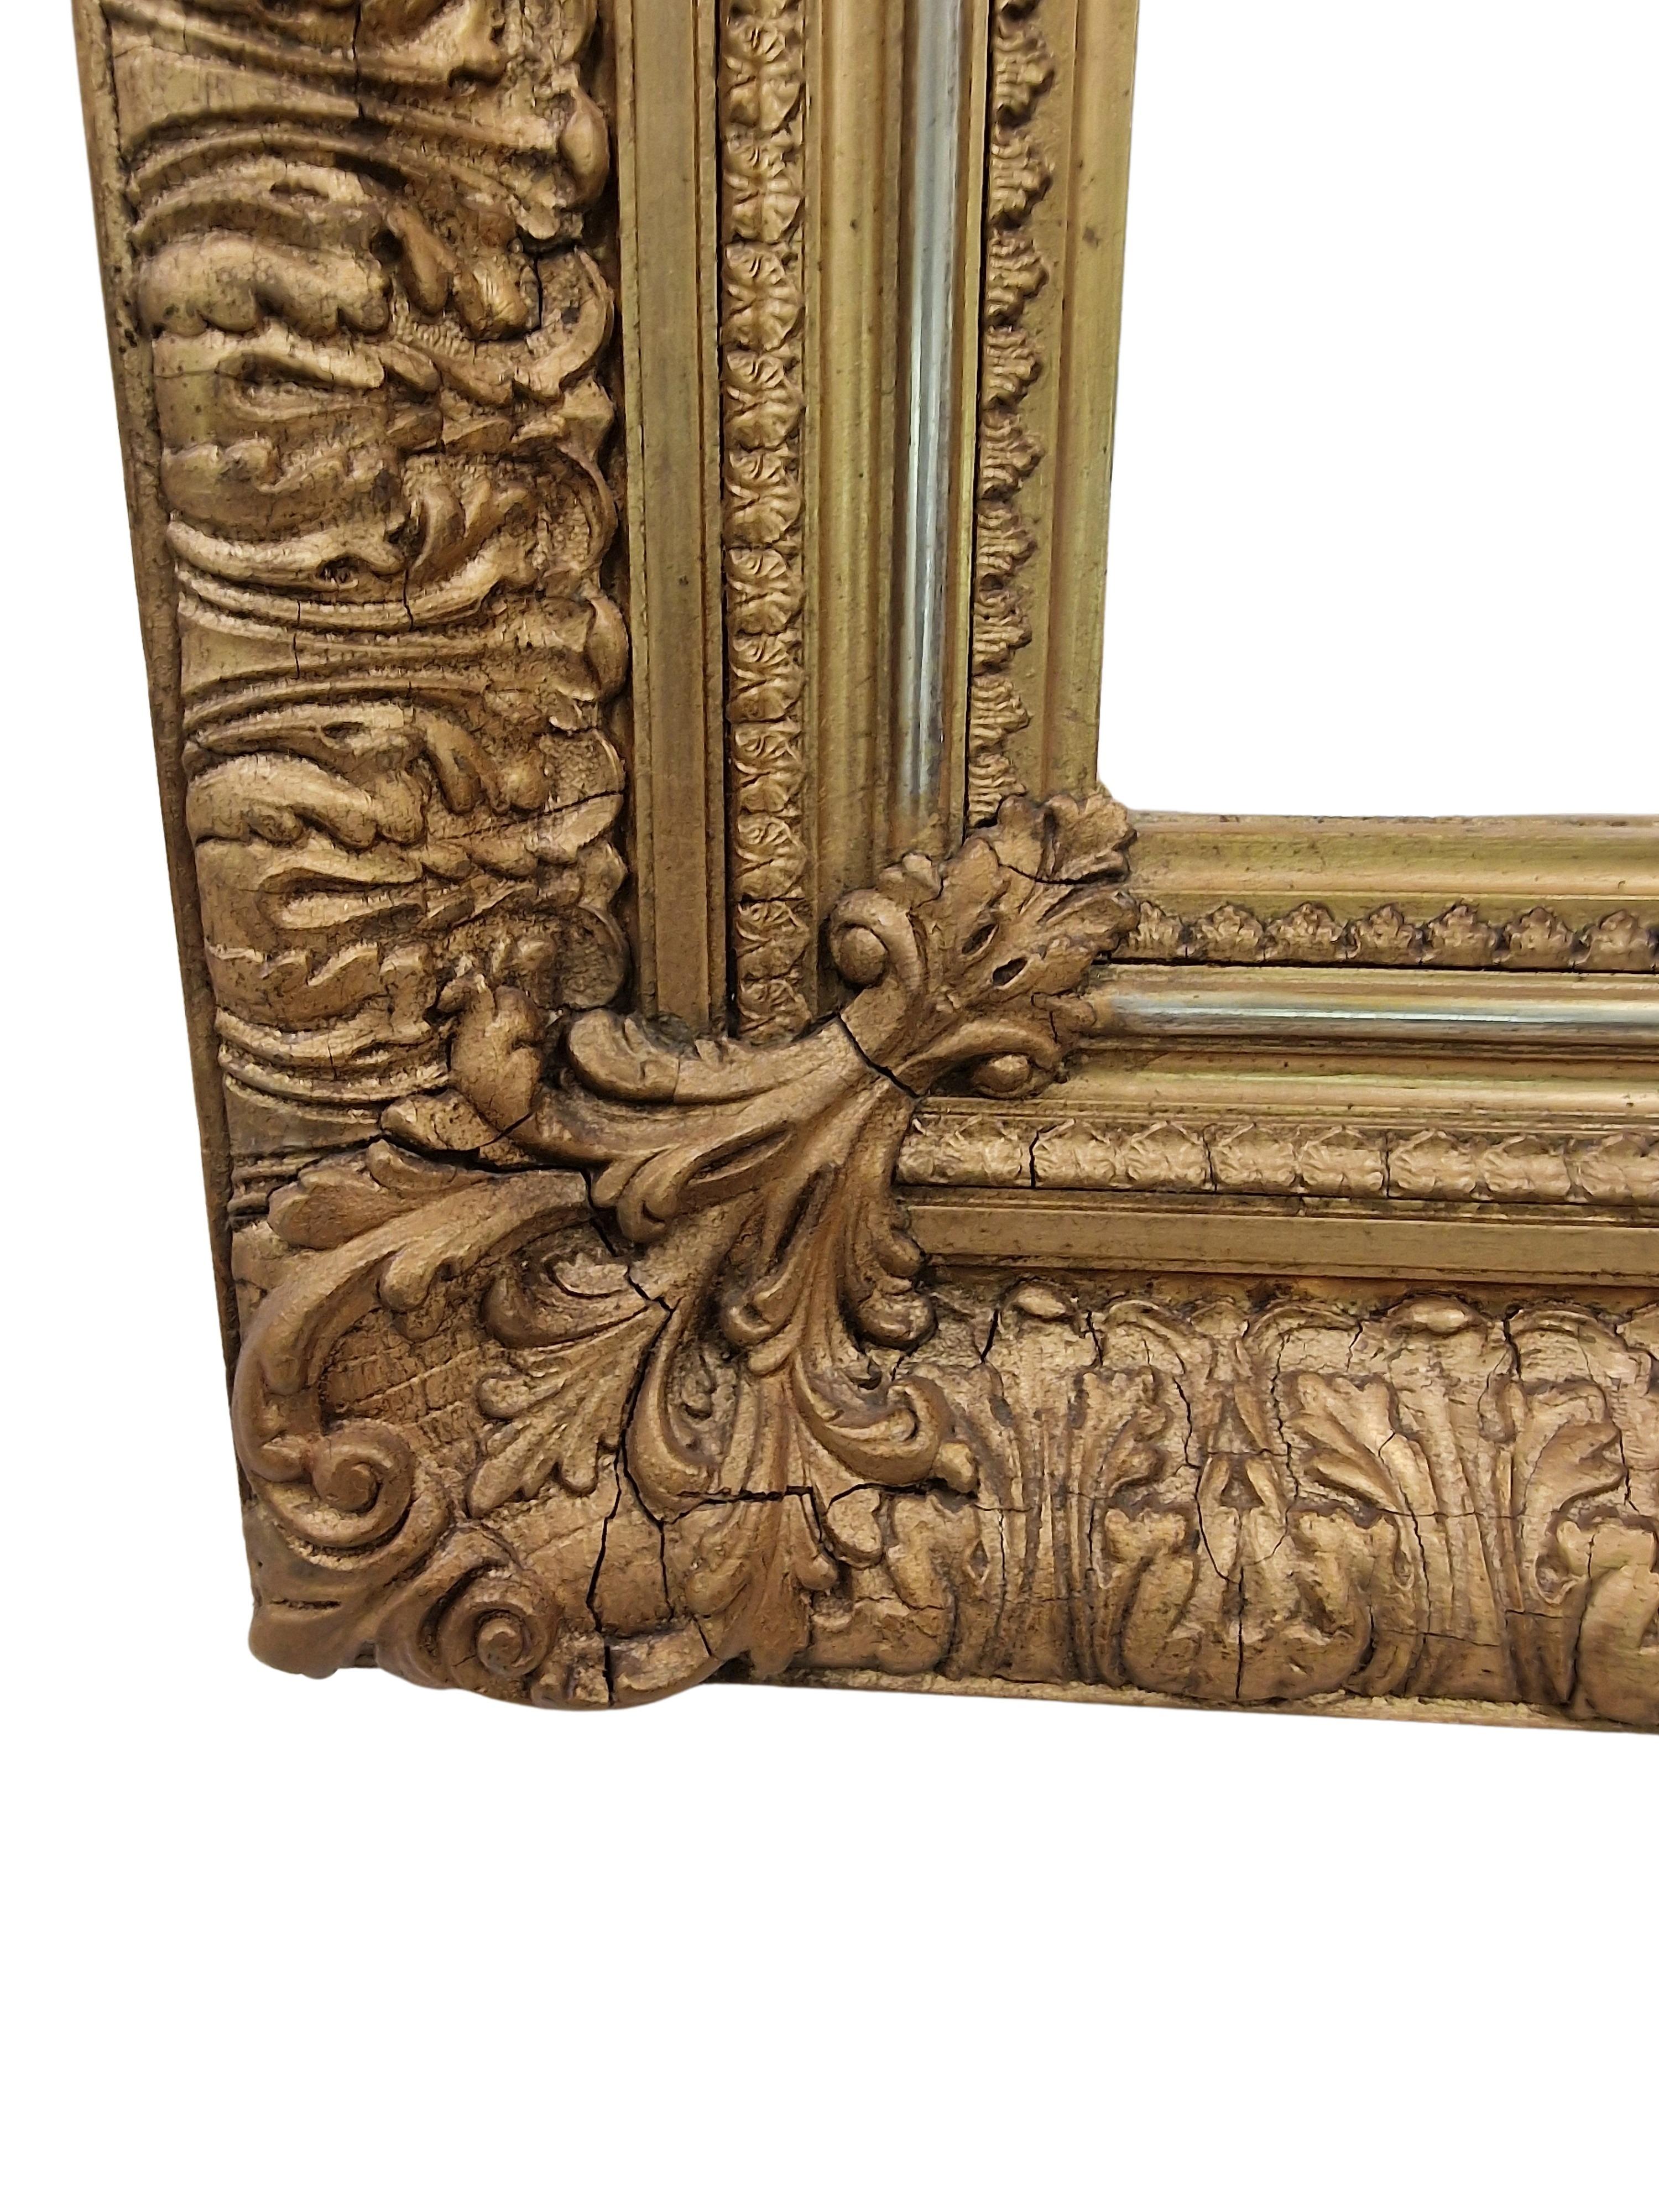 Magnificent wall mirror, frame, an impressive original from the 1880s, made in Austria. 

This impressive hand crafted object is made of wood with a stucco overlay, which is extremely splendidly crafted. There is a gilt metal surface above it,